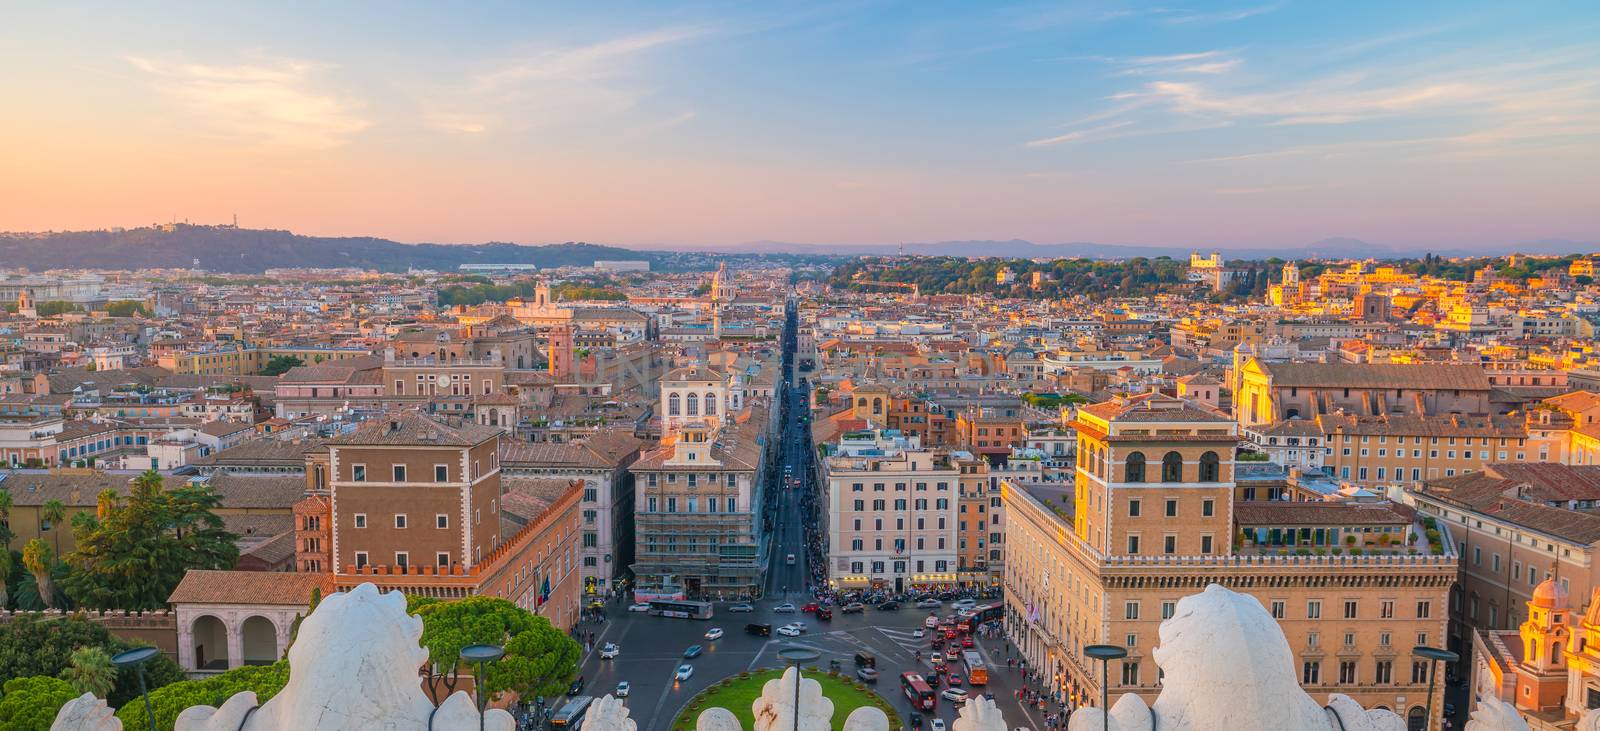 View of old town Rome skyline in Italy by f11photo